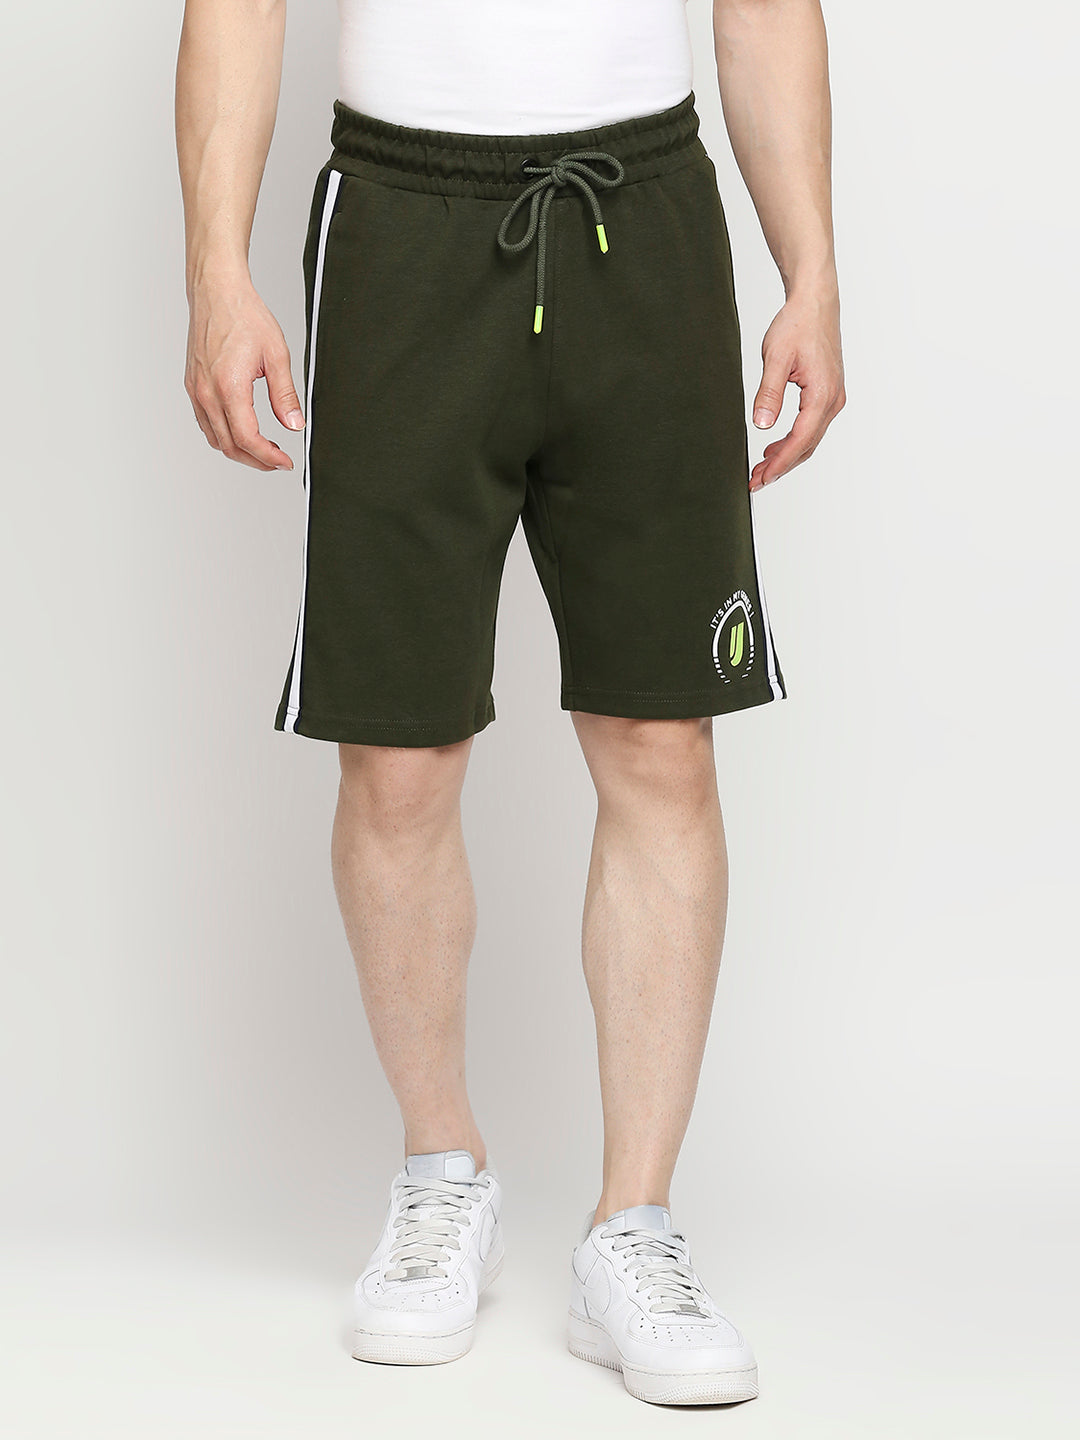 Men Cotton Blend Knitted Rifle Green Shorts- Underjeans by Spykar